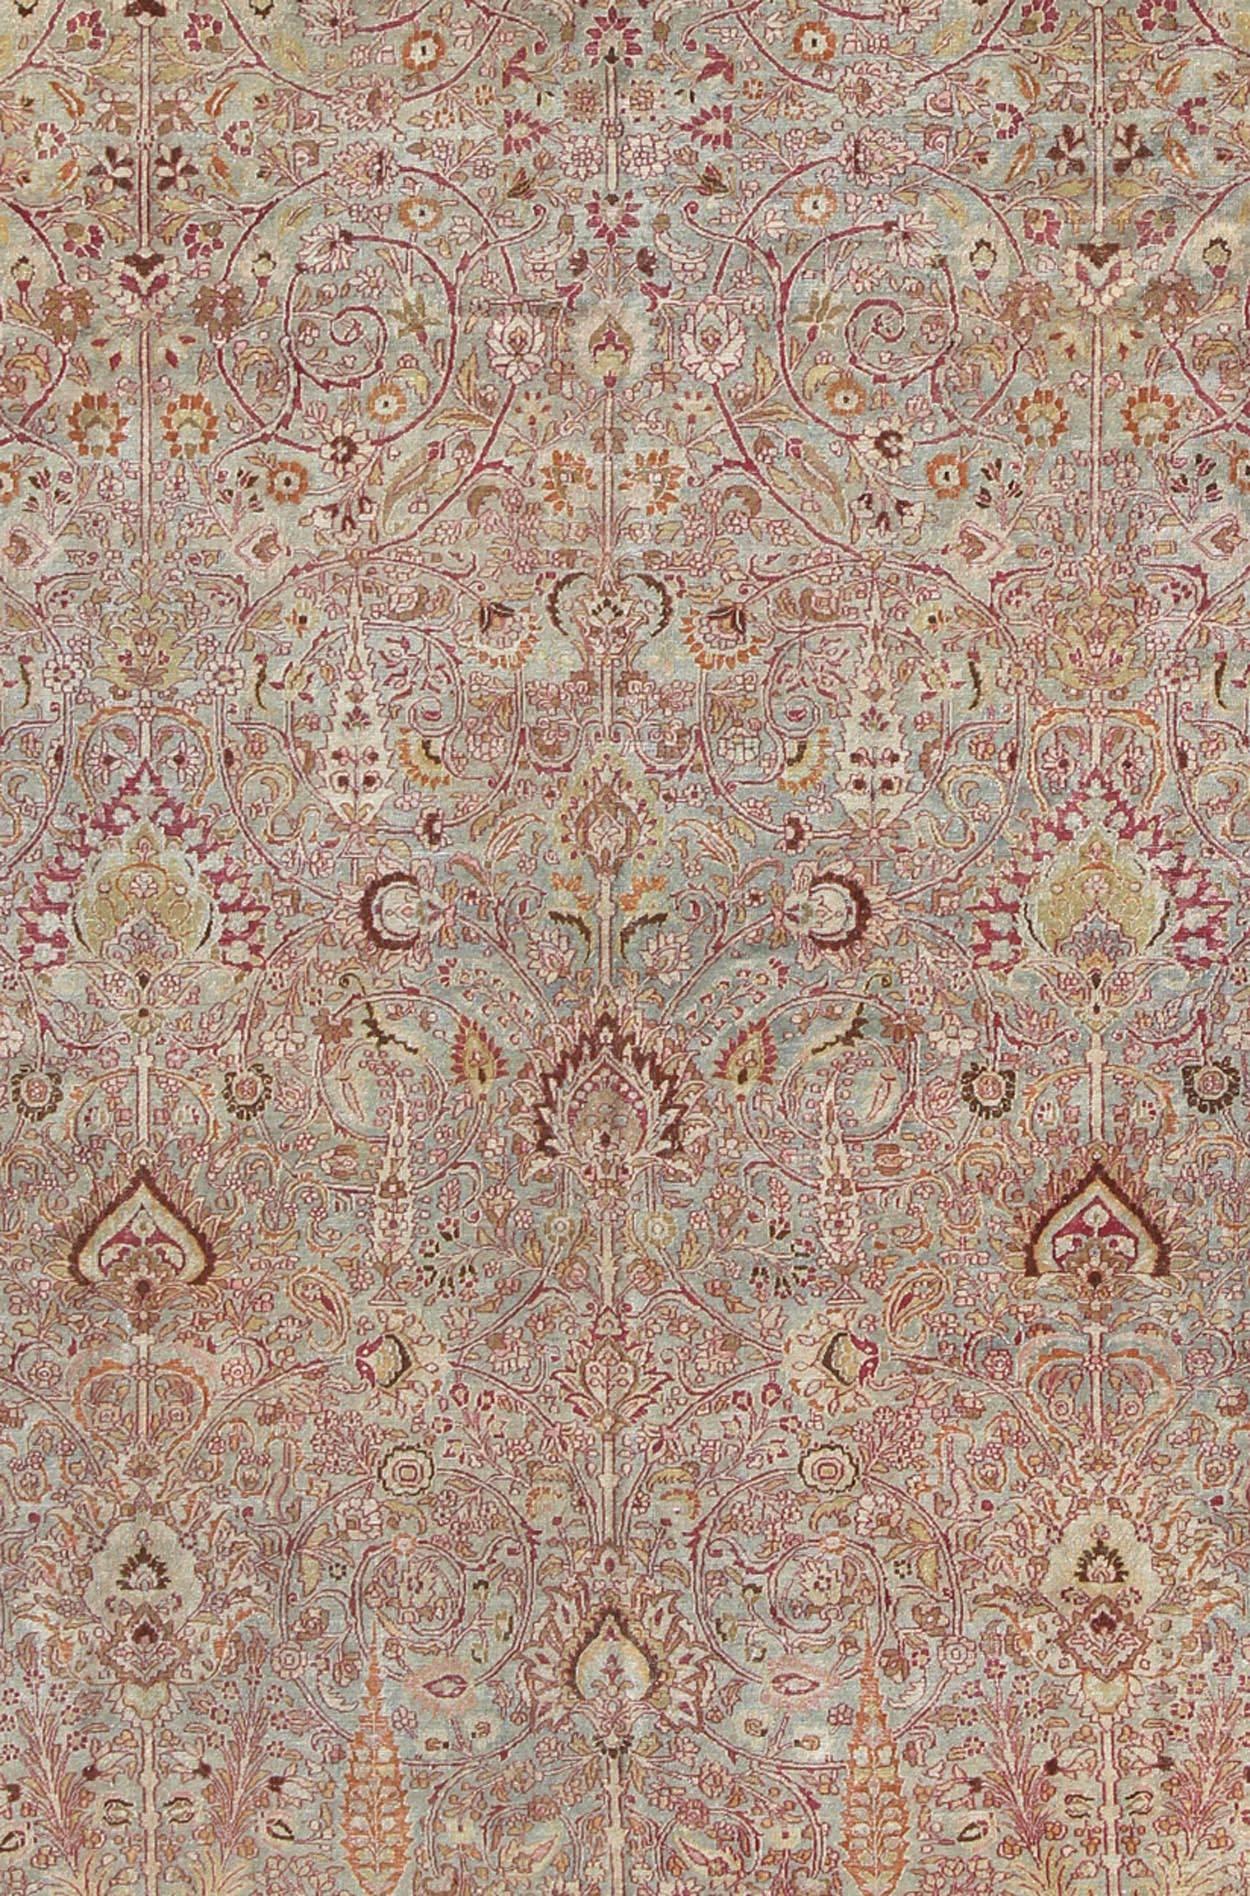 Hand-Knotted Antique Persian Khorassan Rug with All-Over Floral Design in Orange, Red, Pink For Sale